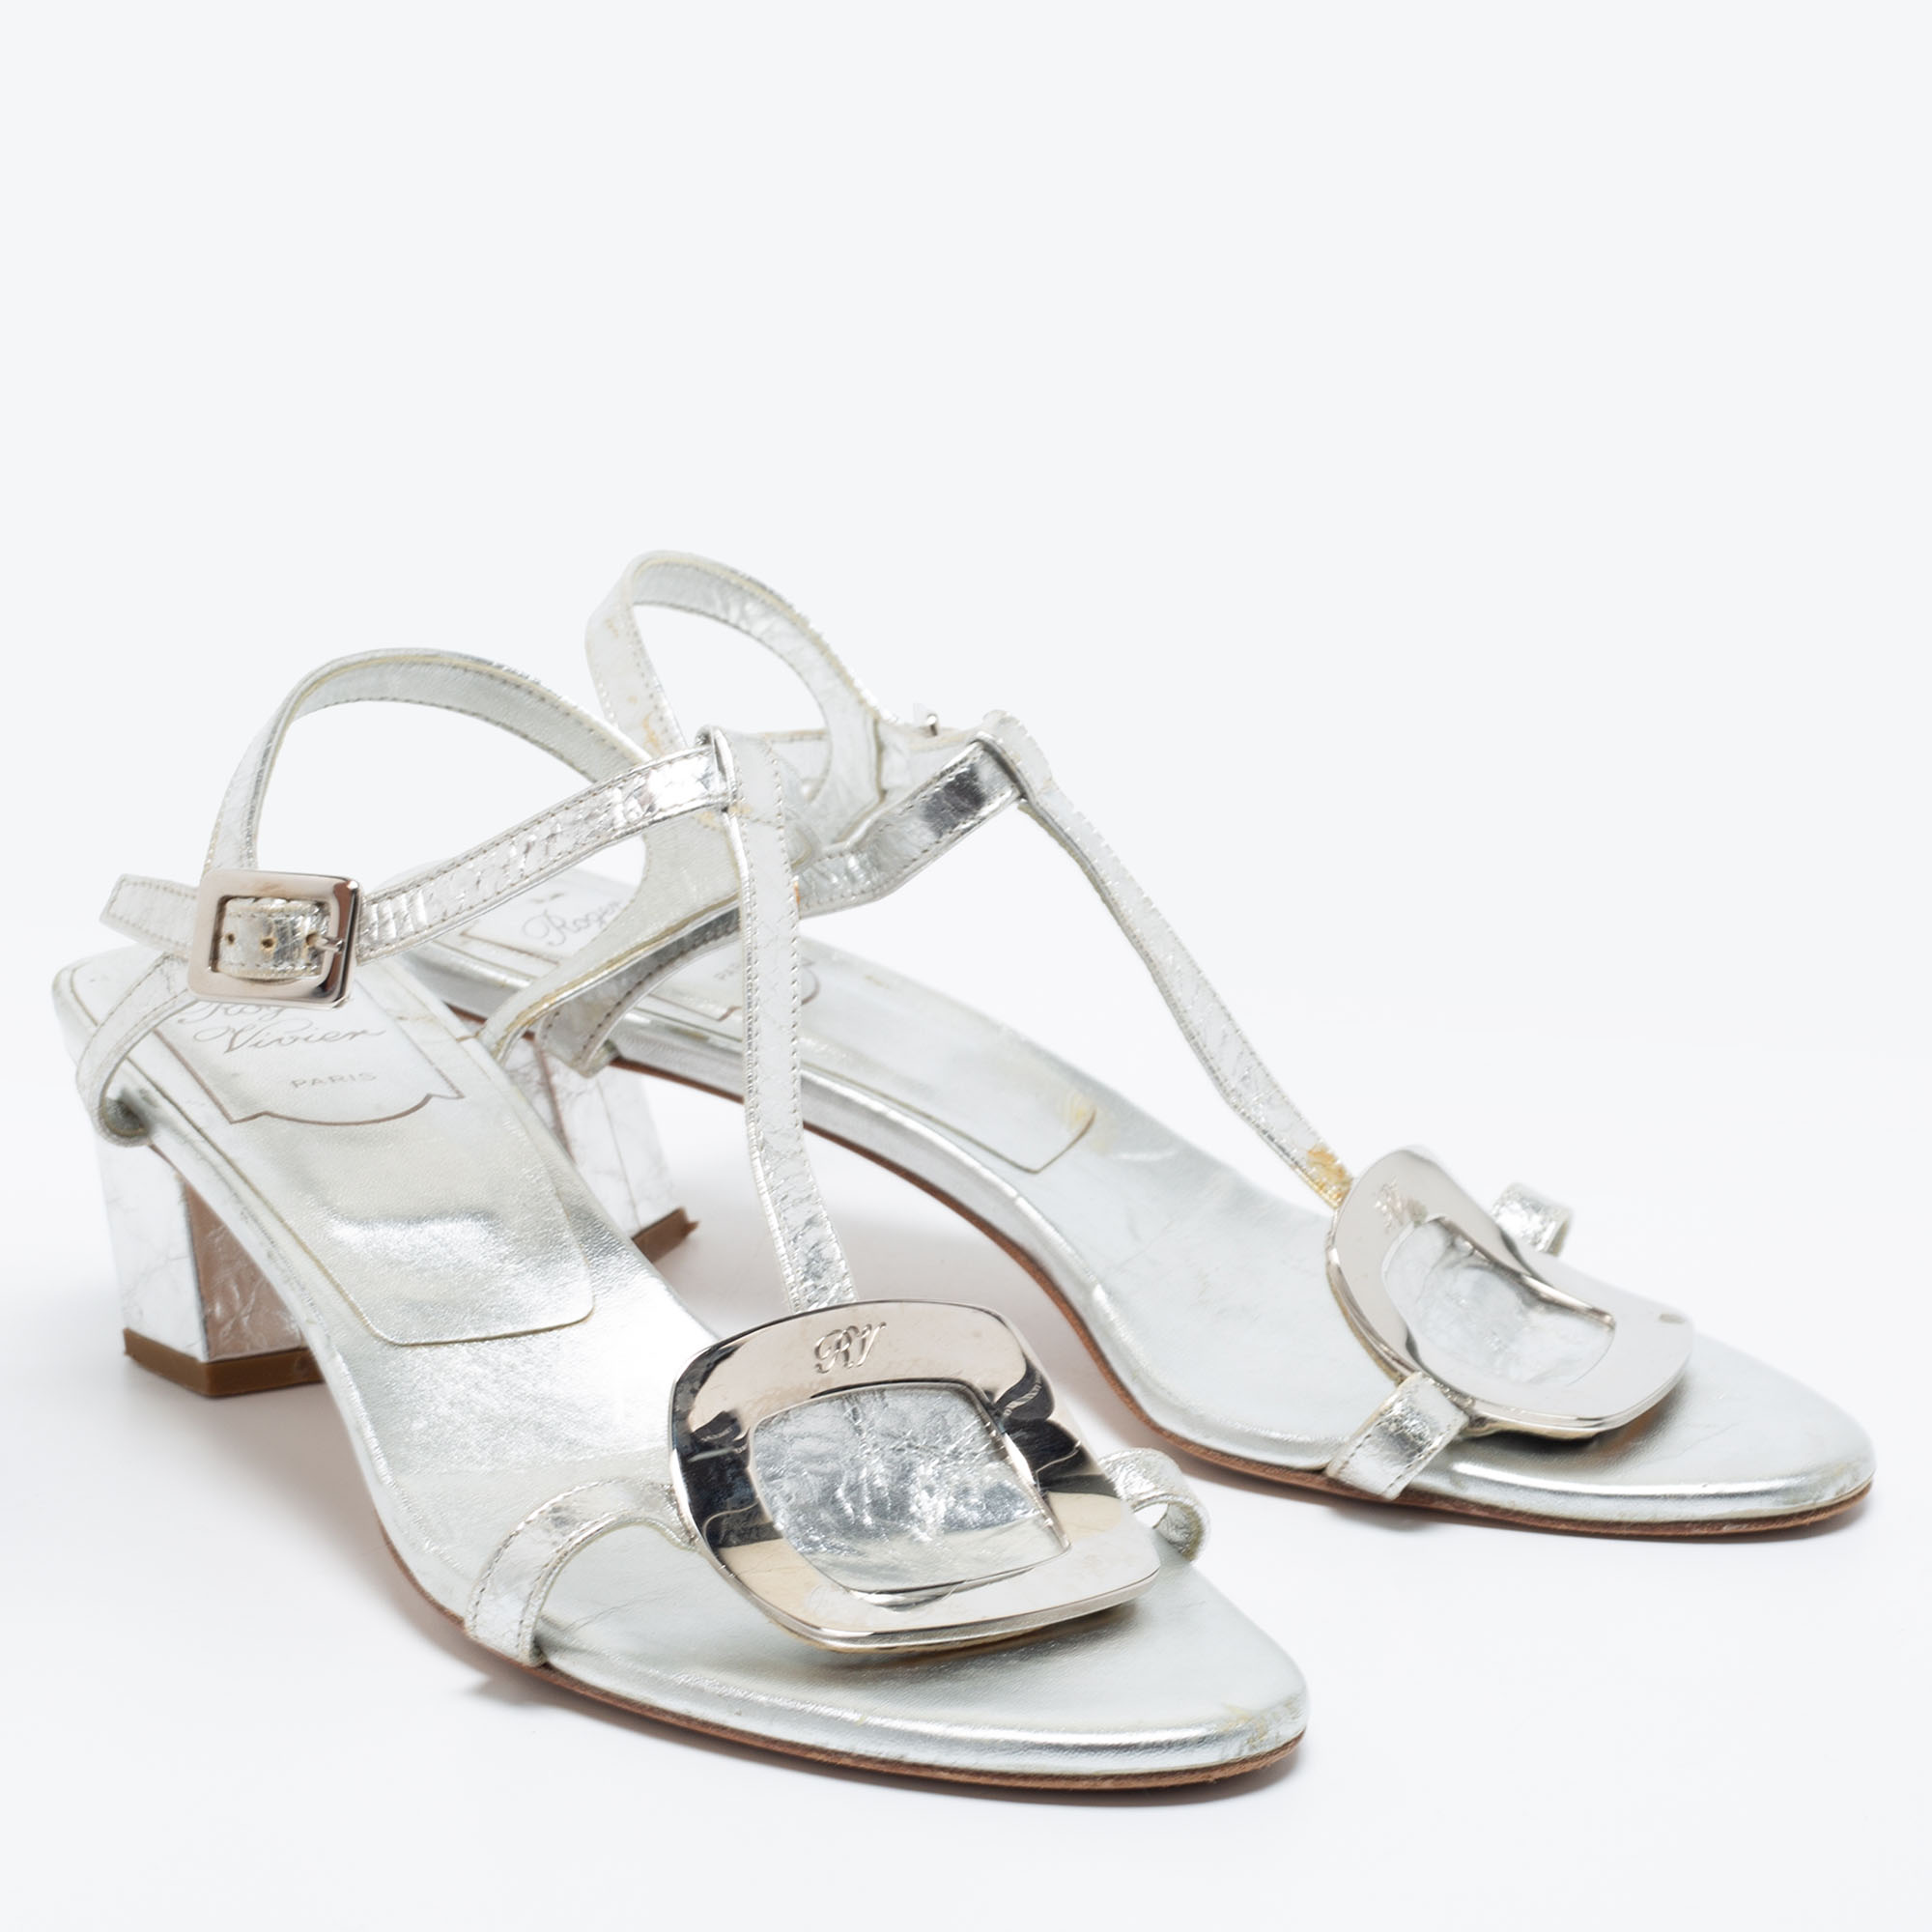 Roger Vivier Silver Metallic Silver Leather Ankle Strap Sandals Size 37